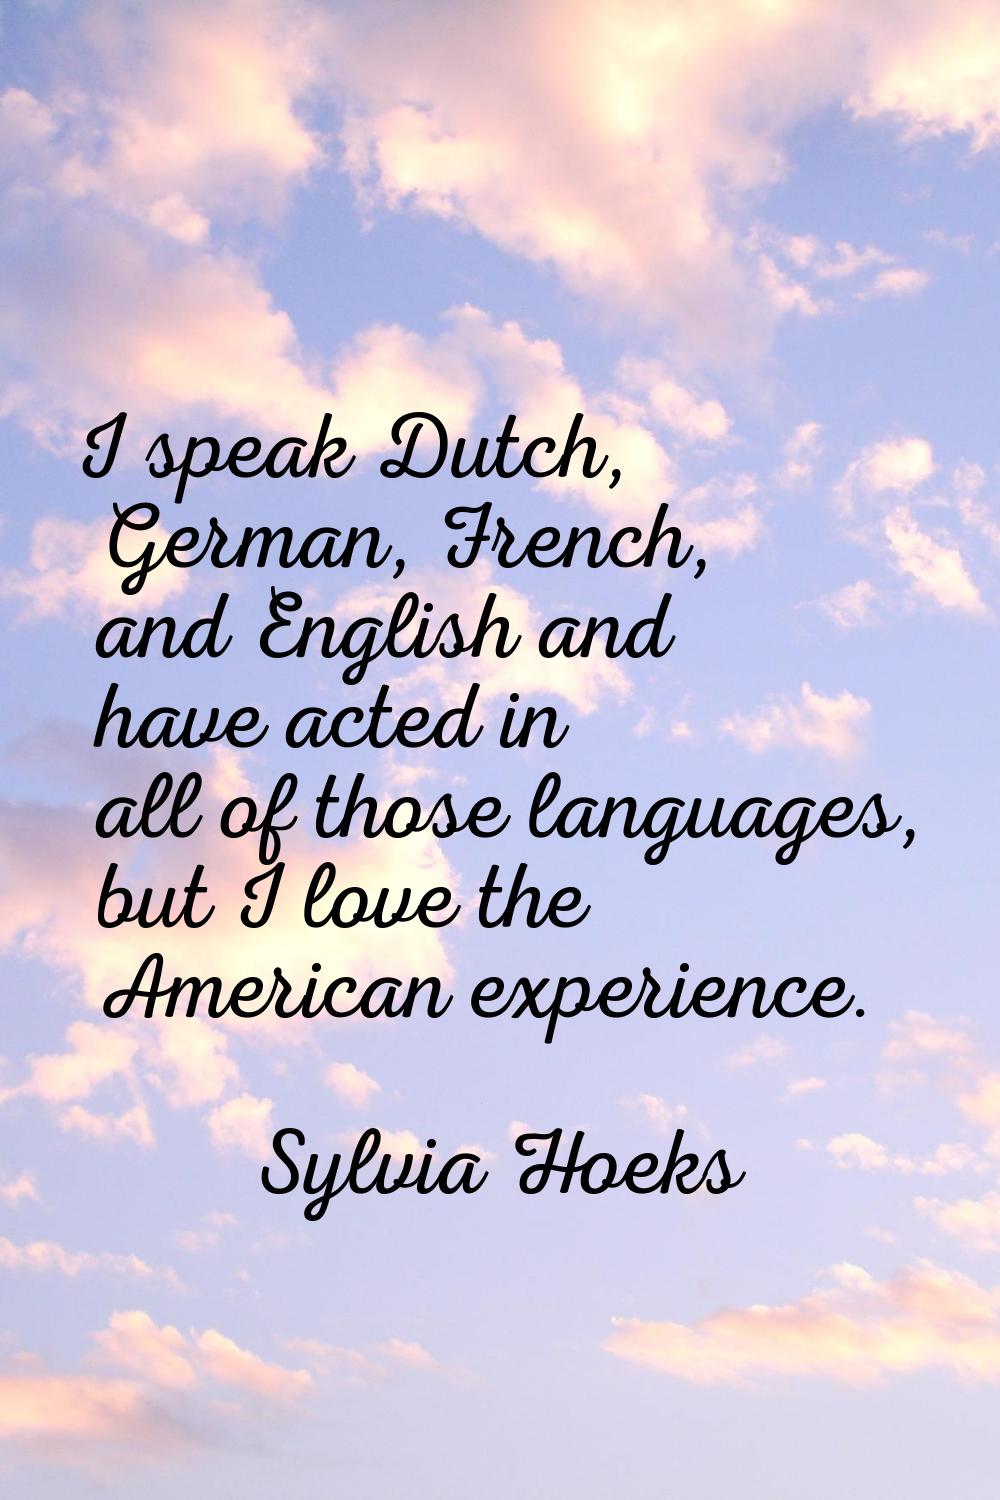 I speak Dutch, German, French, and English and have acted in all of those languages, but I love the